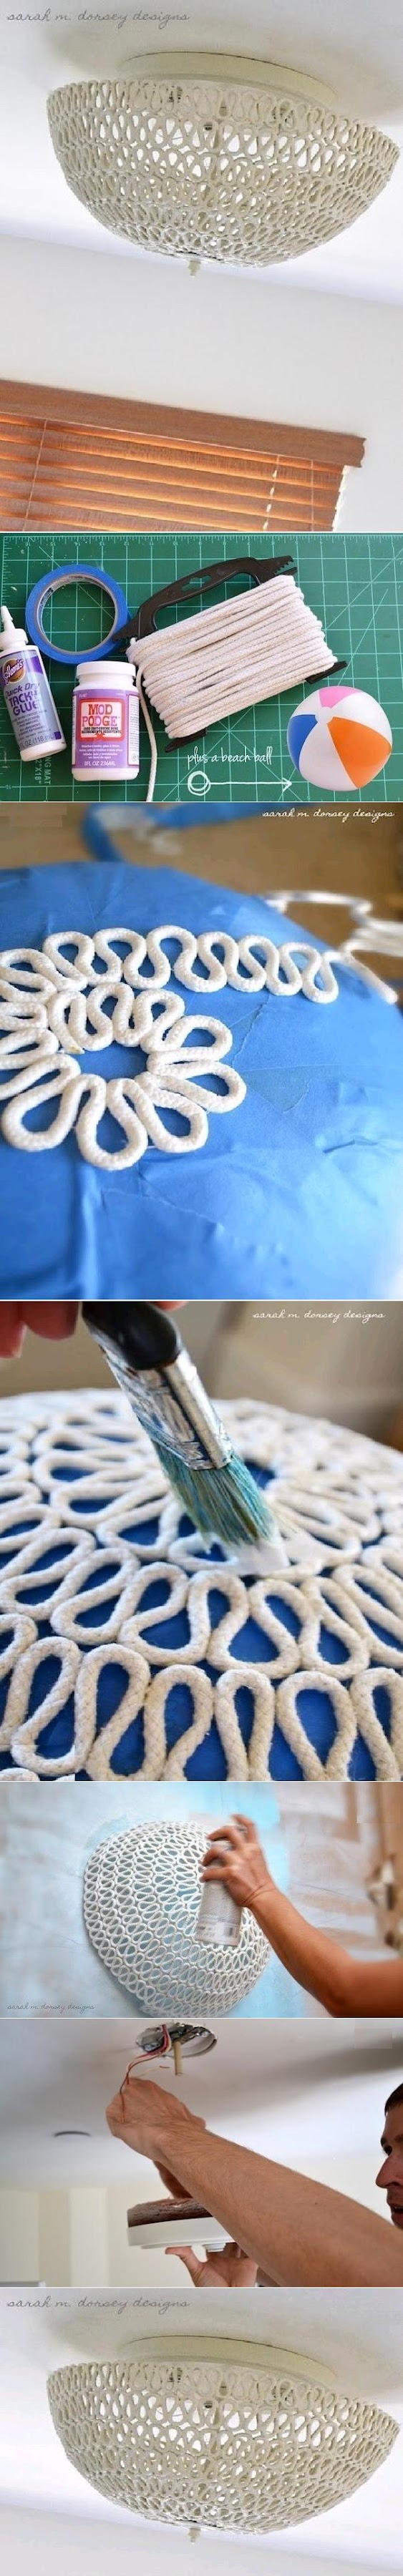 Easy Way To Make Lampshade From Rope